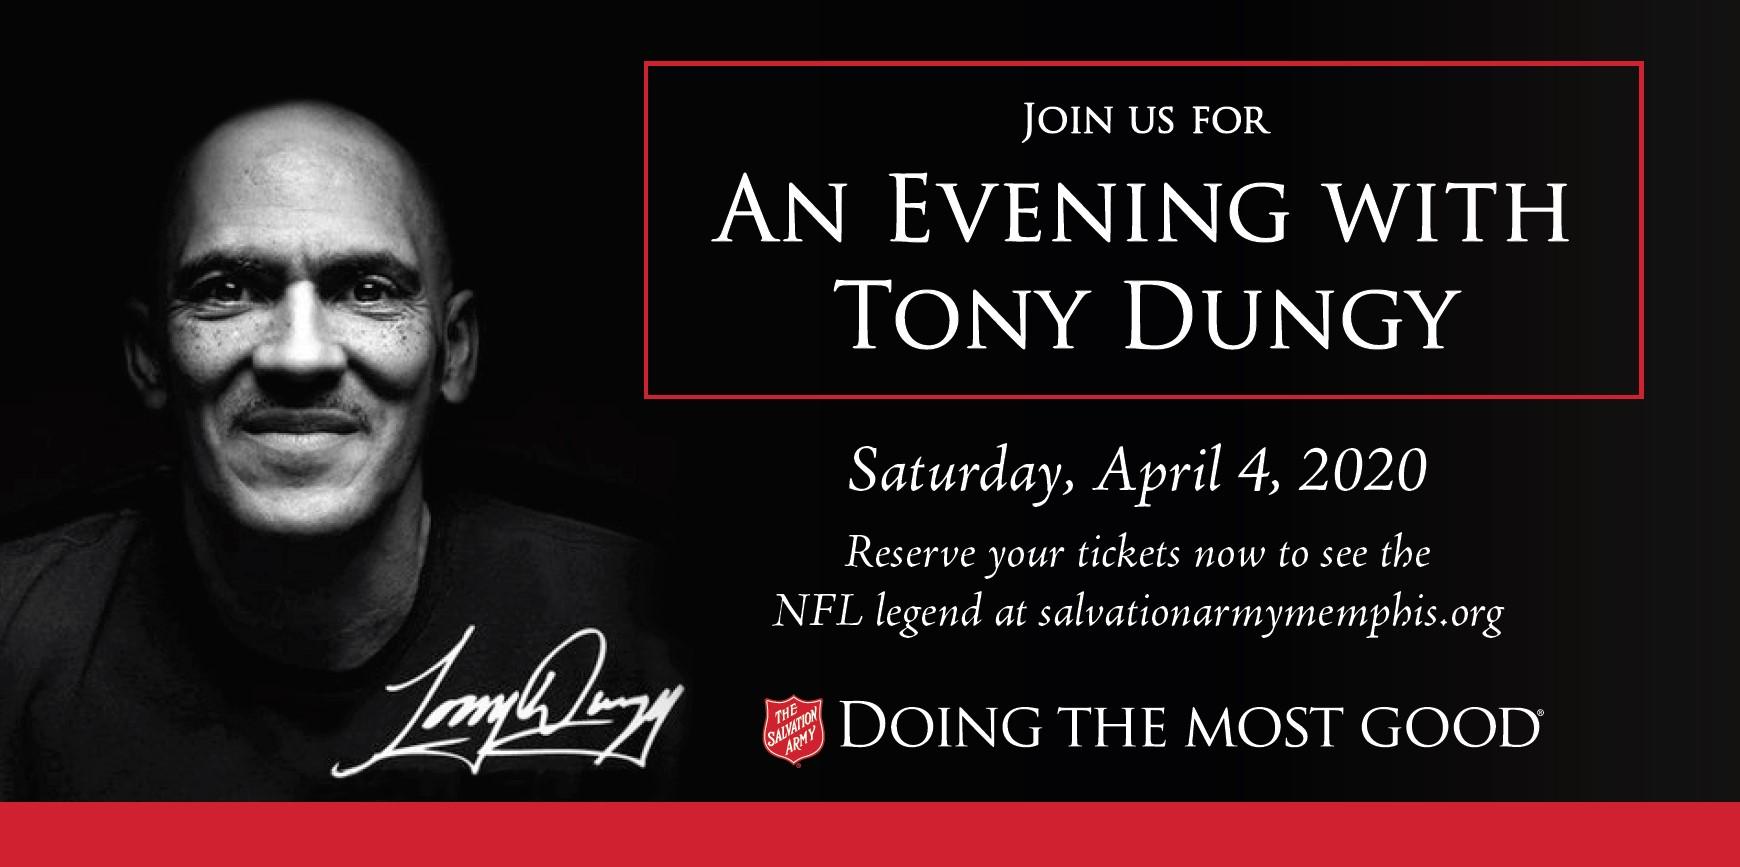 An Evening with Tony Dungy